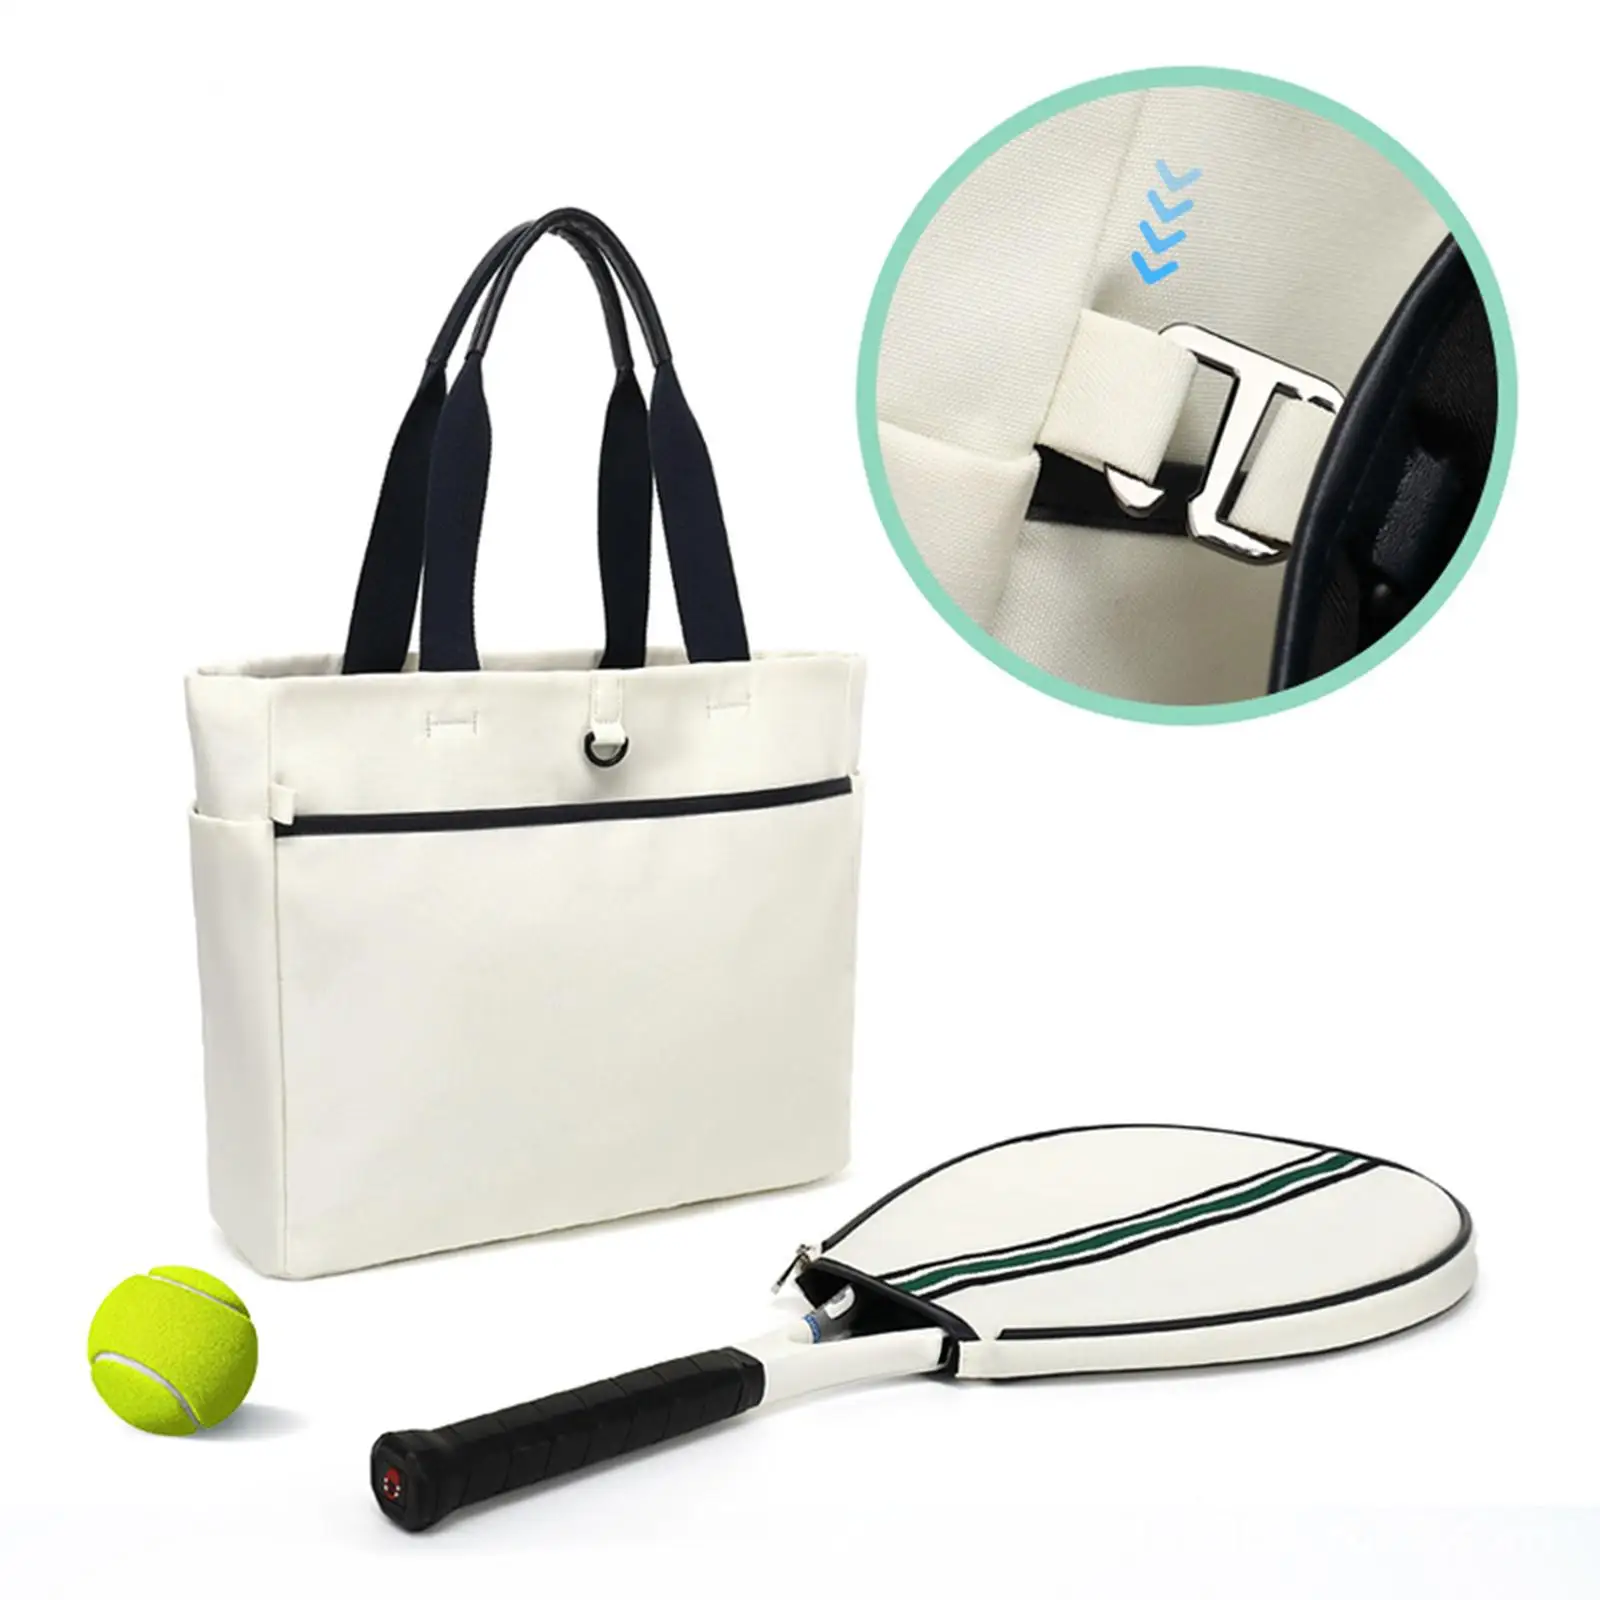 Tennis Tote Outdoor Sports Rucksack Racquet Carrying Bag Detachable Racquet Cover with Shoulder Strap Carrying Tennis Racket Bag